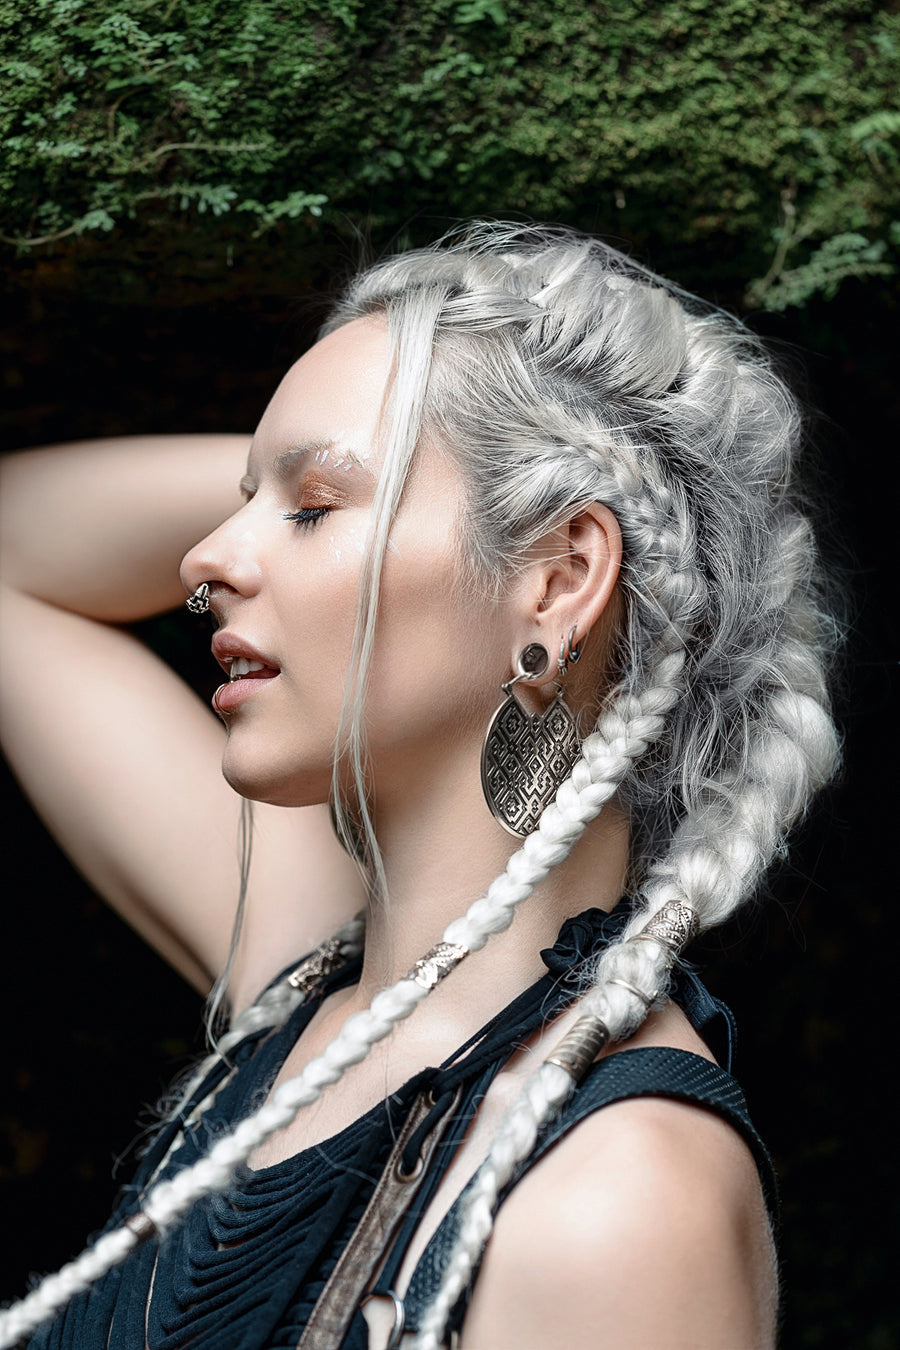 Image showing a woman from the side with intricately braided silver hair, showcasing large geometric Silver earrings with a complex Shipibo-inspired design.